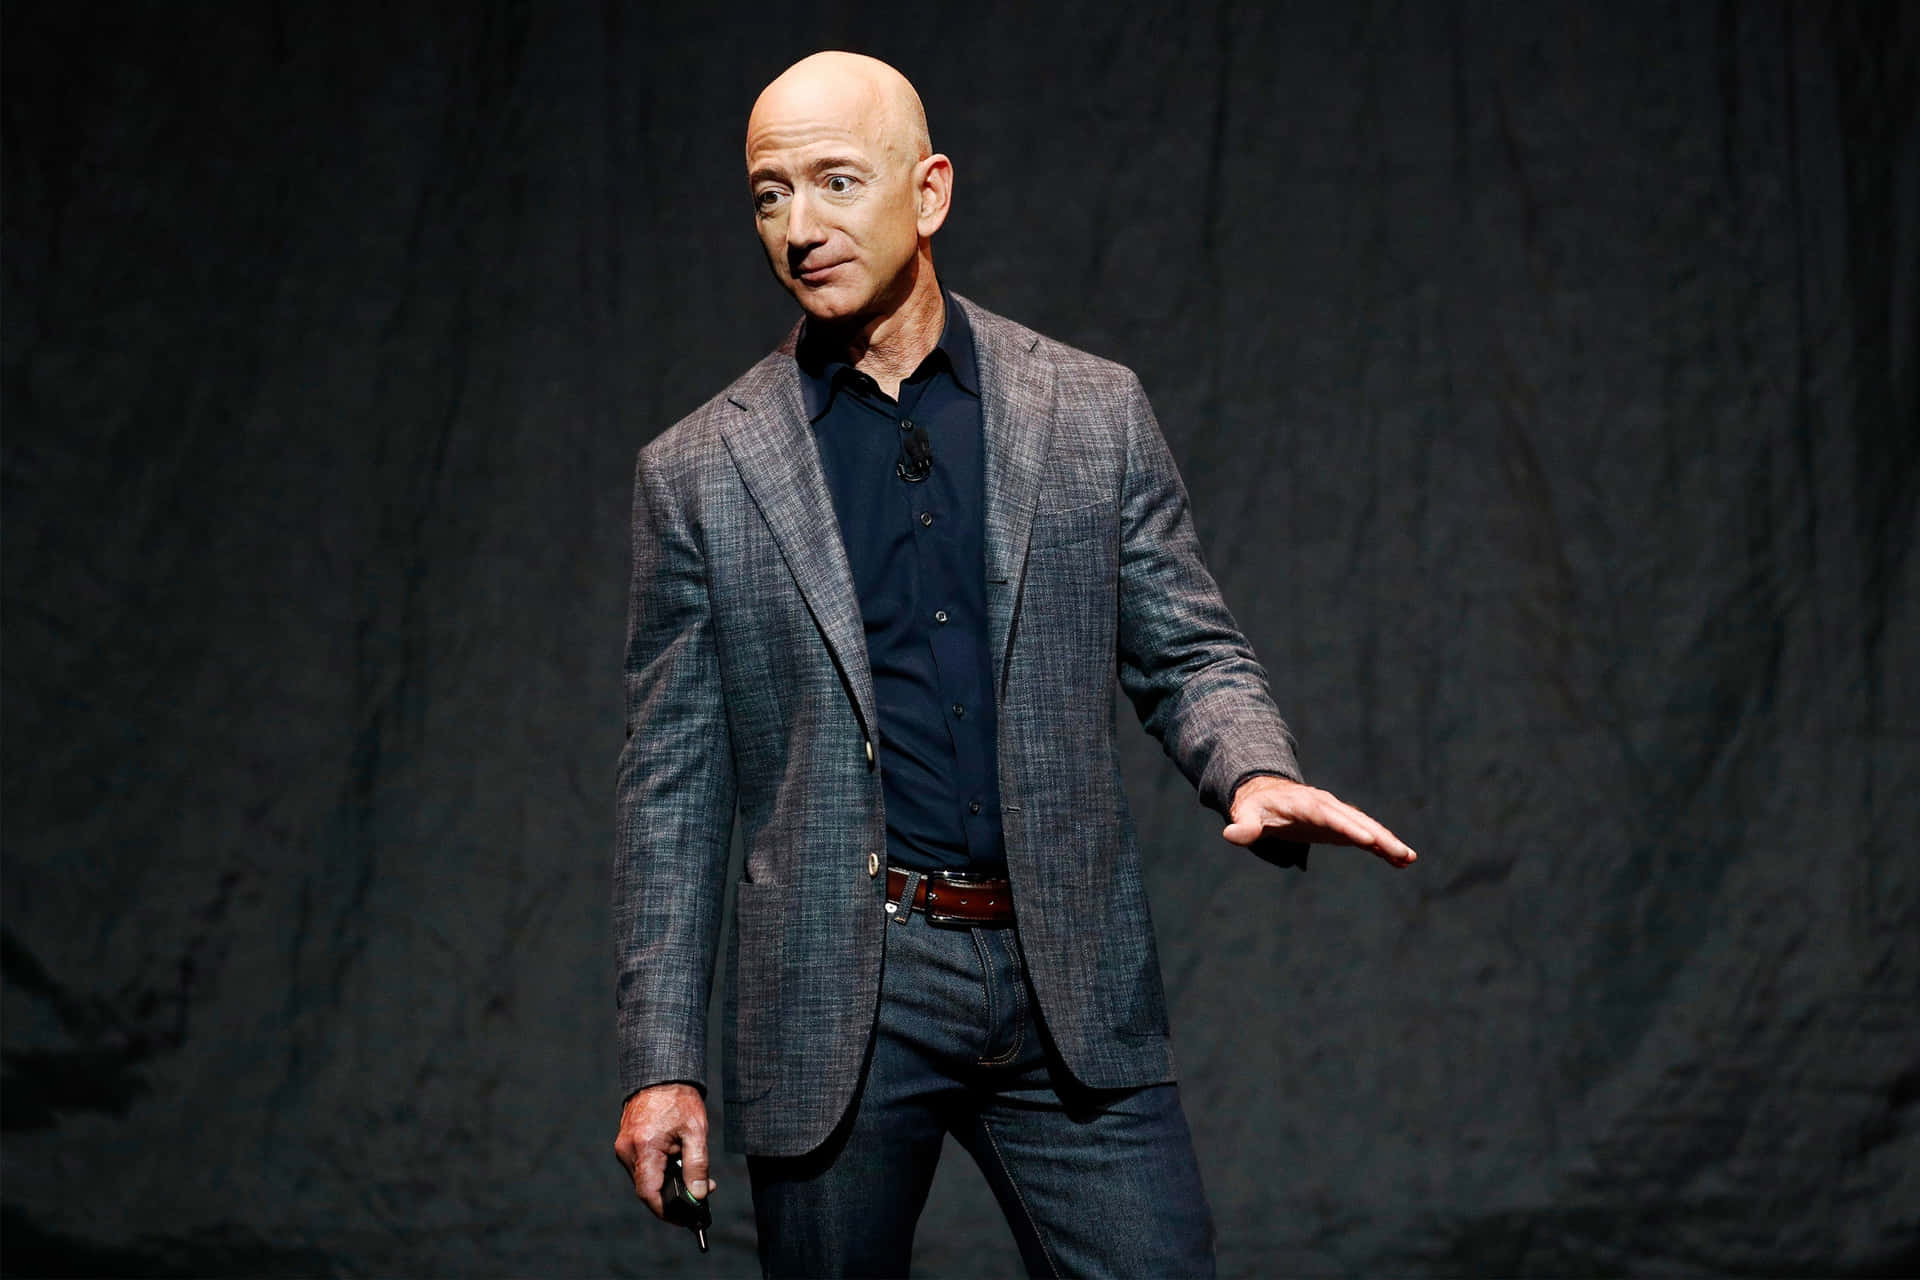 Jeff Bezos Smiling in a Professional Setting